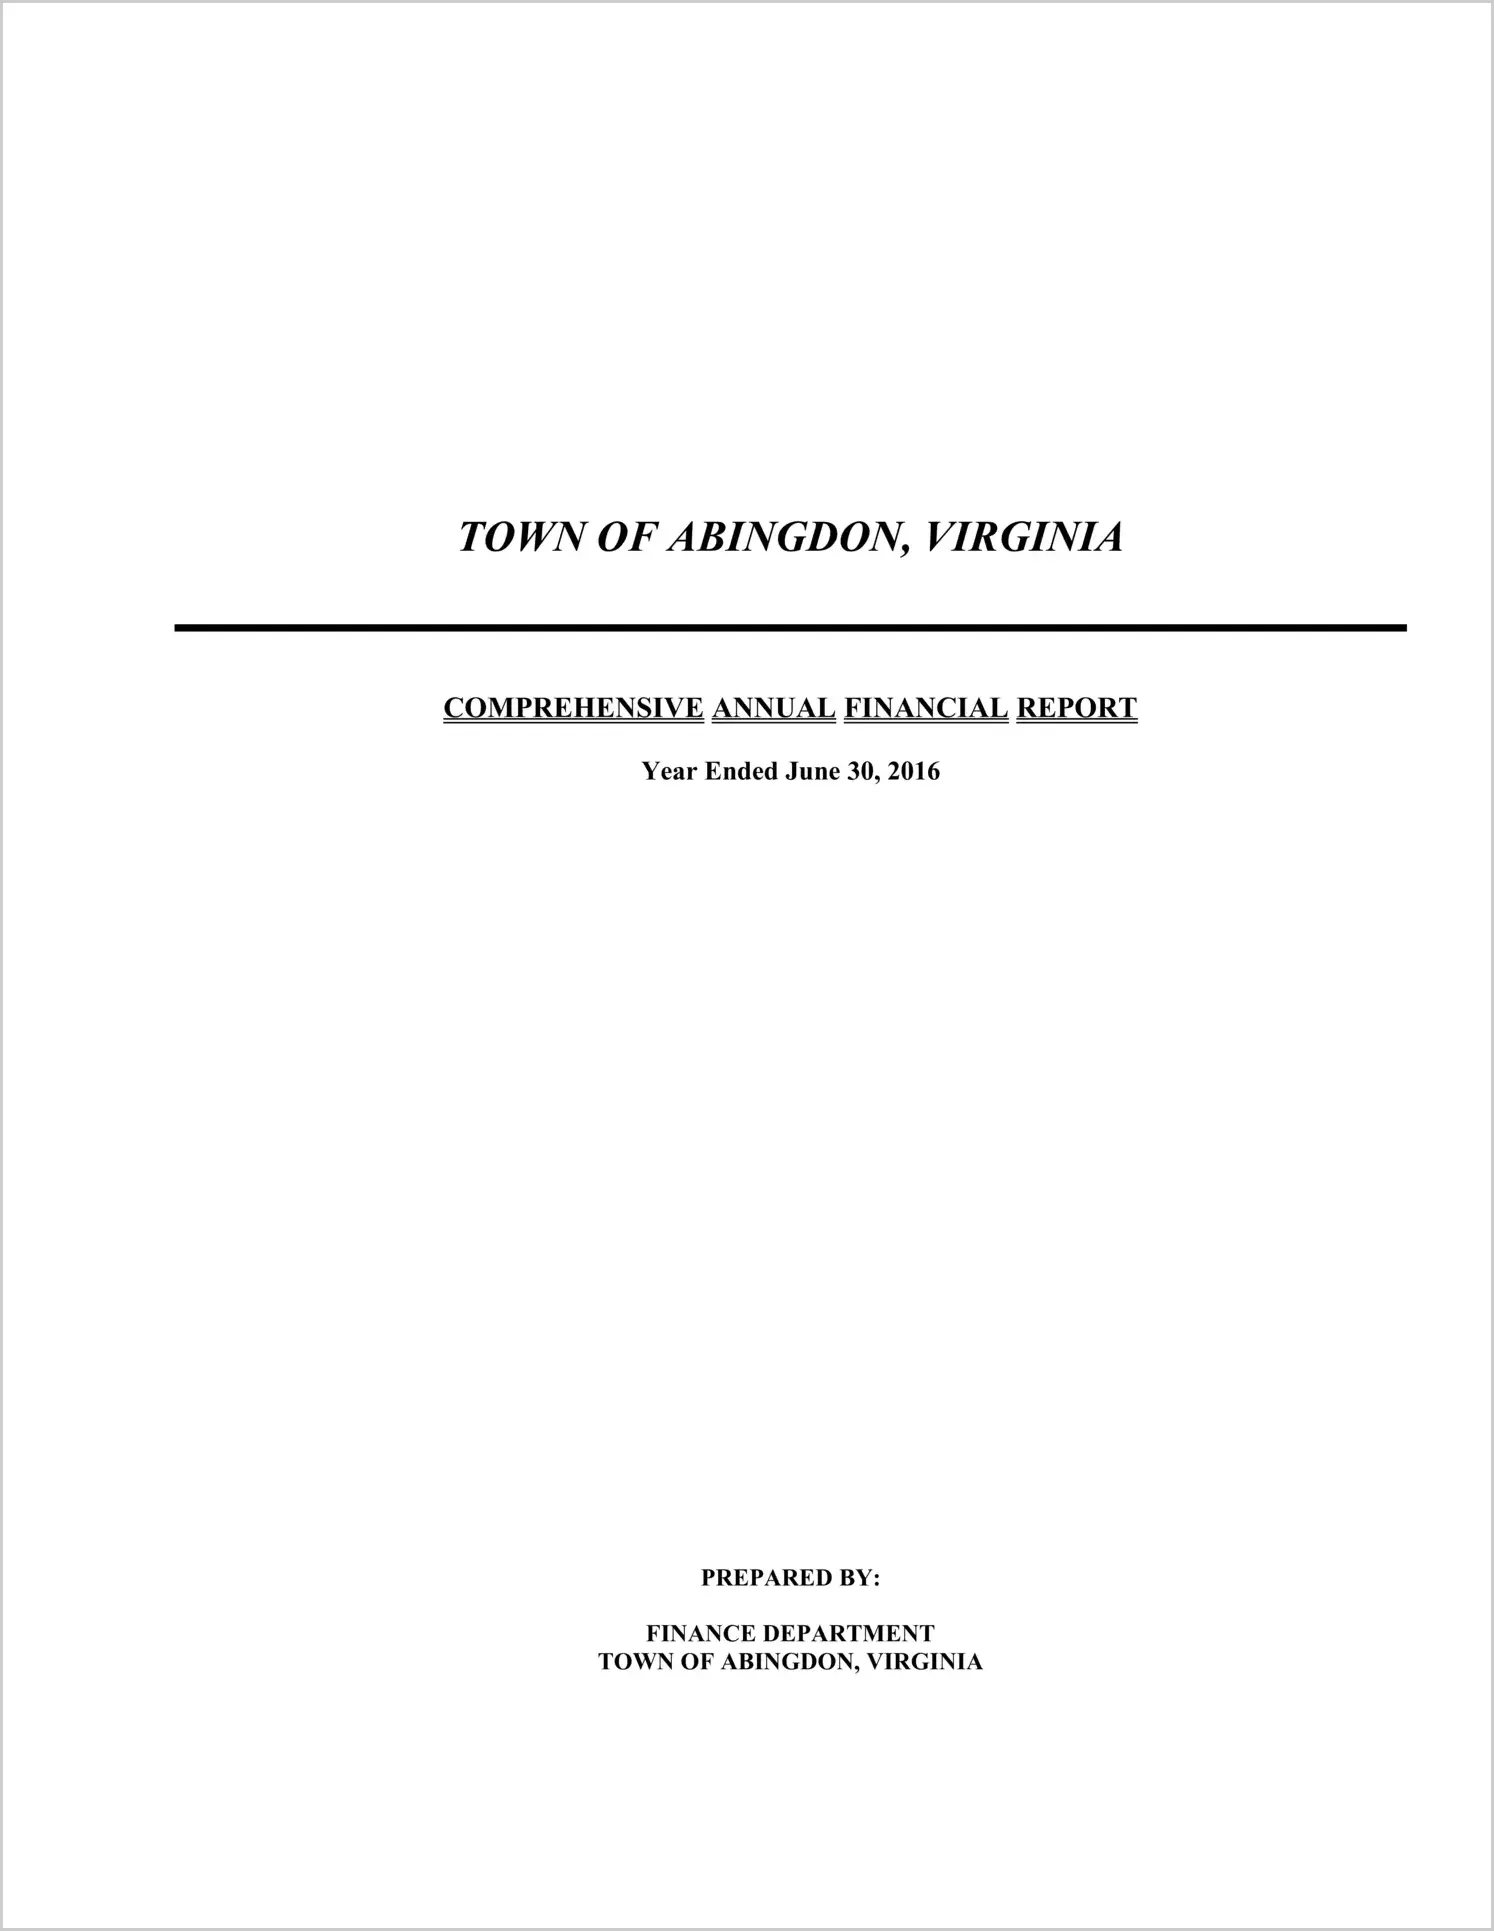 2016 Annual Financial Report for Town of Abingdon